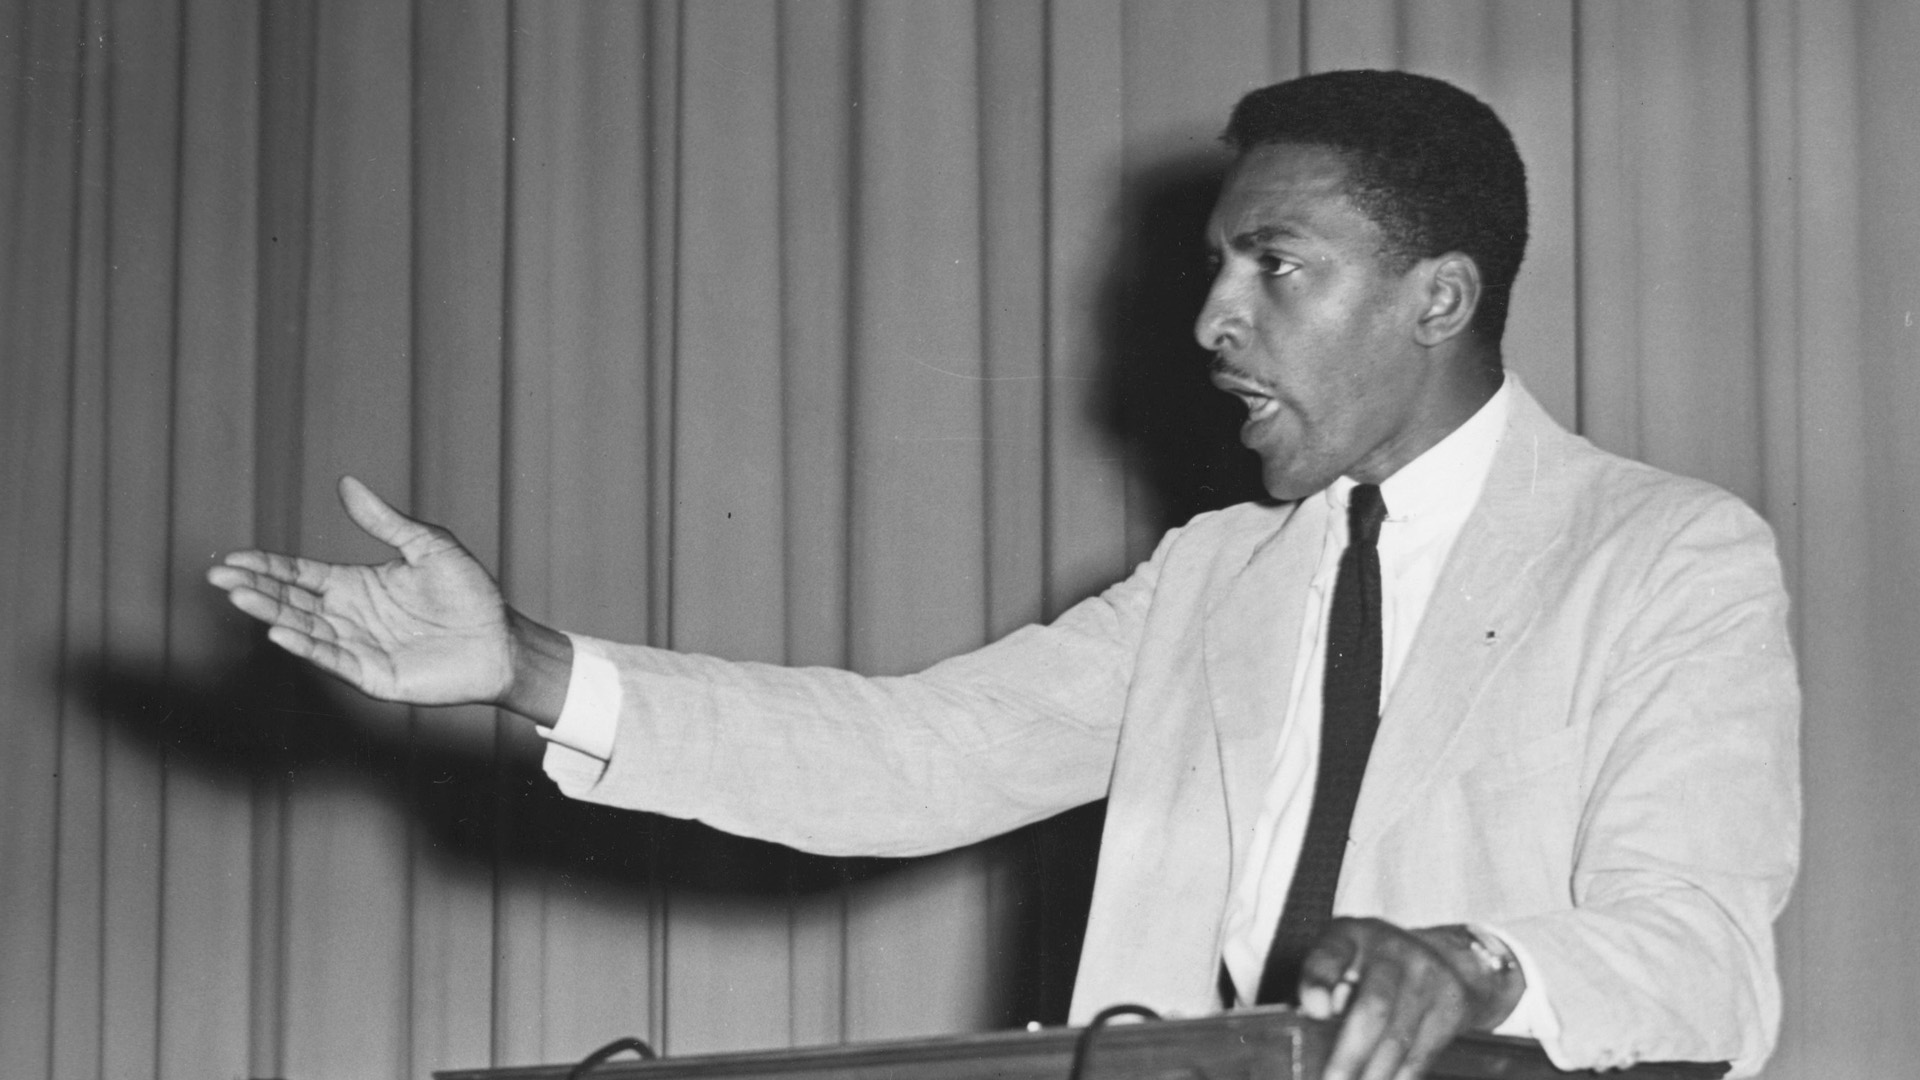 Bayard Rustin speaking at a podium with arm outstretched